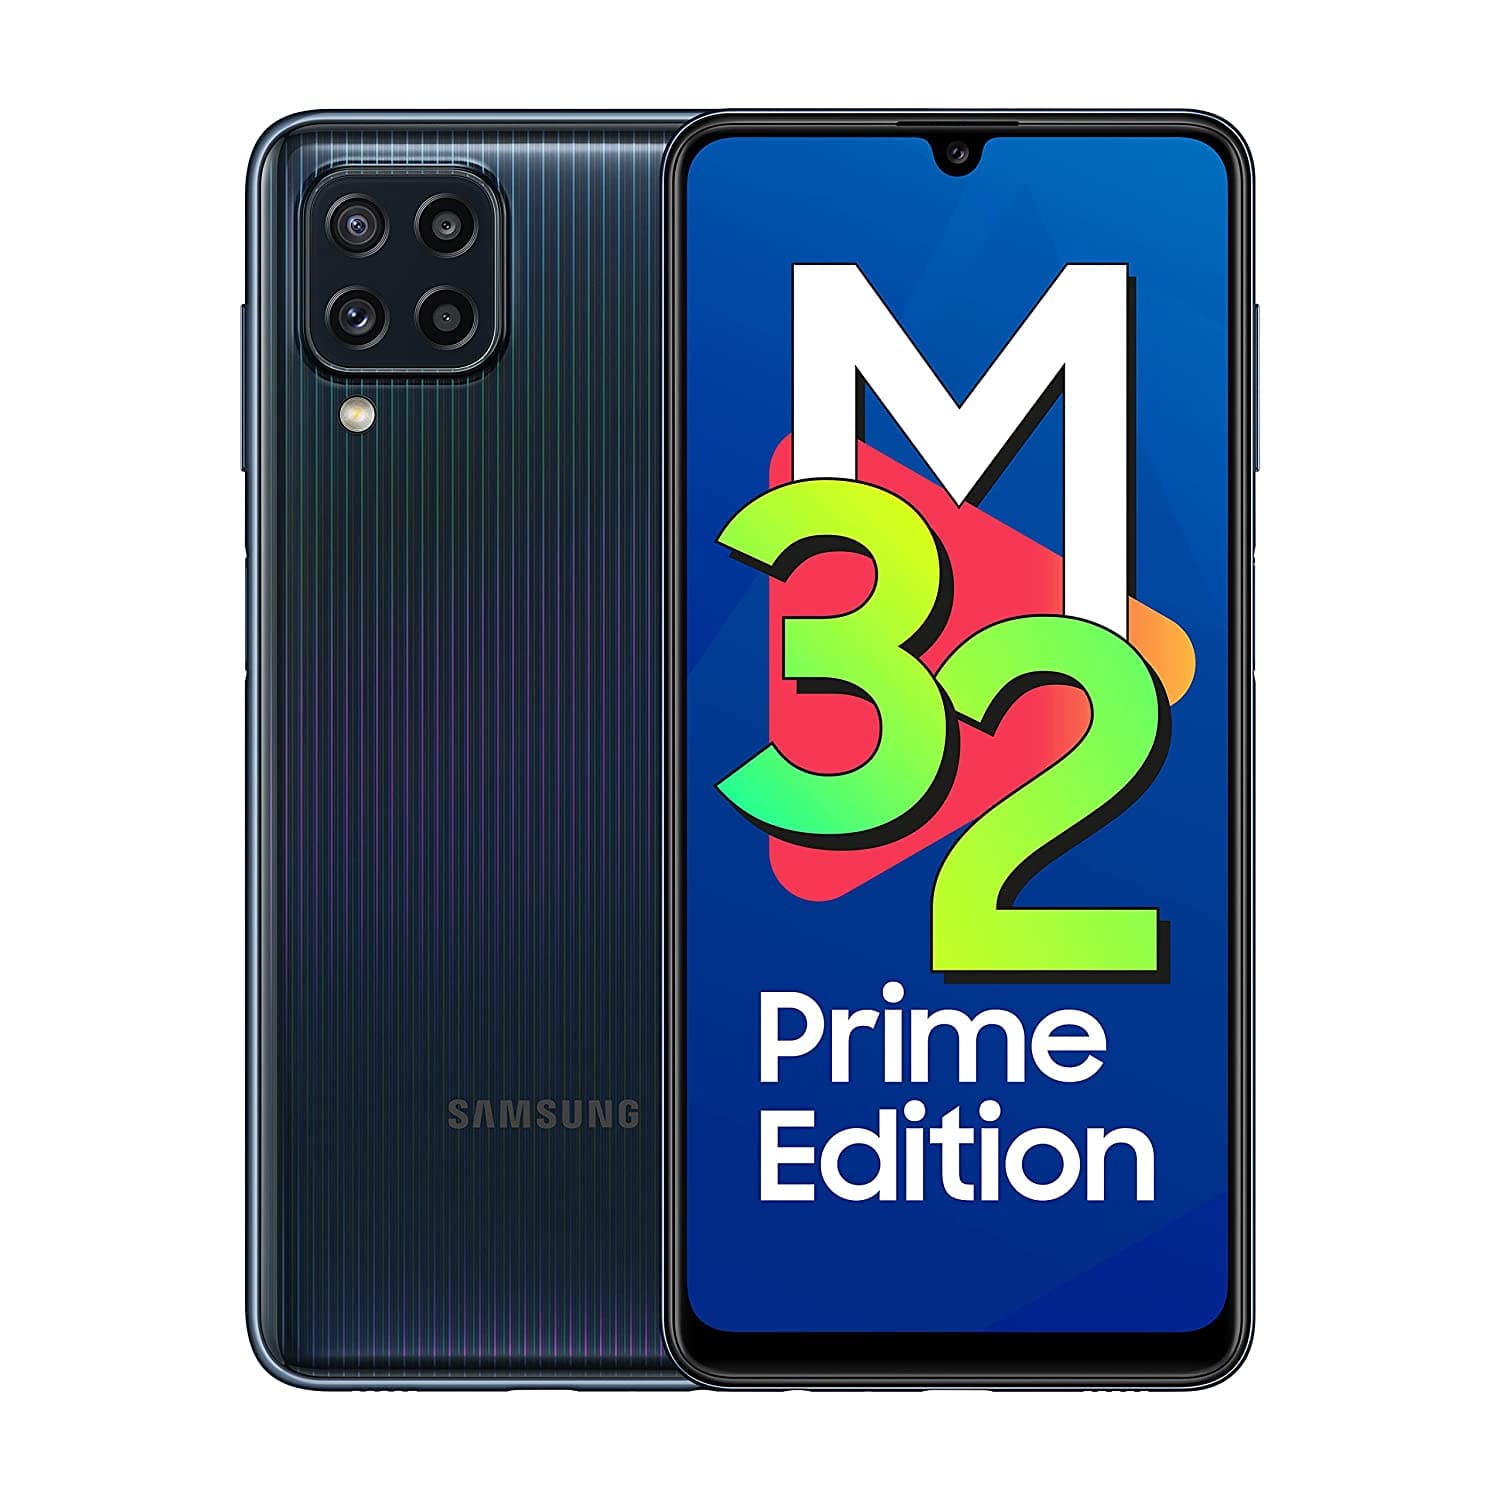 Samsung Galaxy M32 Prime Edition is a mobile under 15000